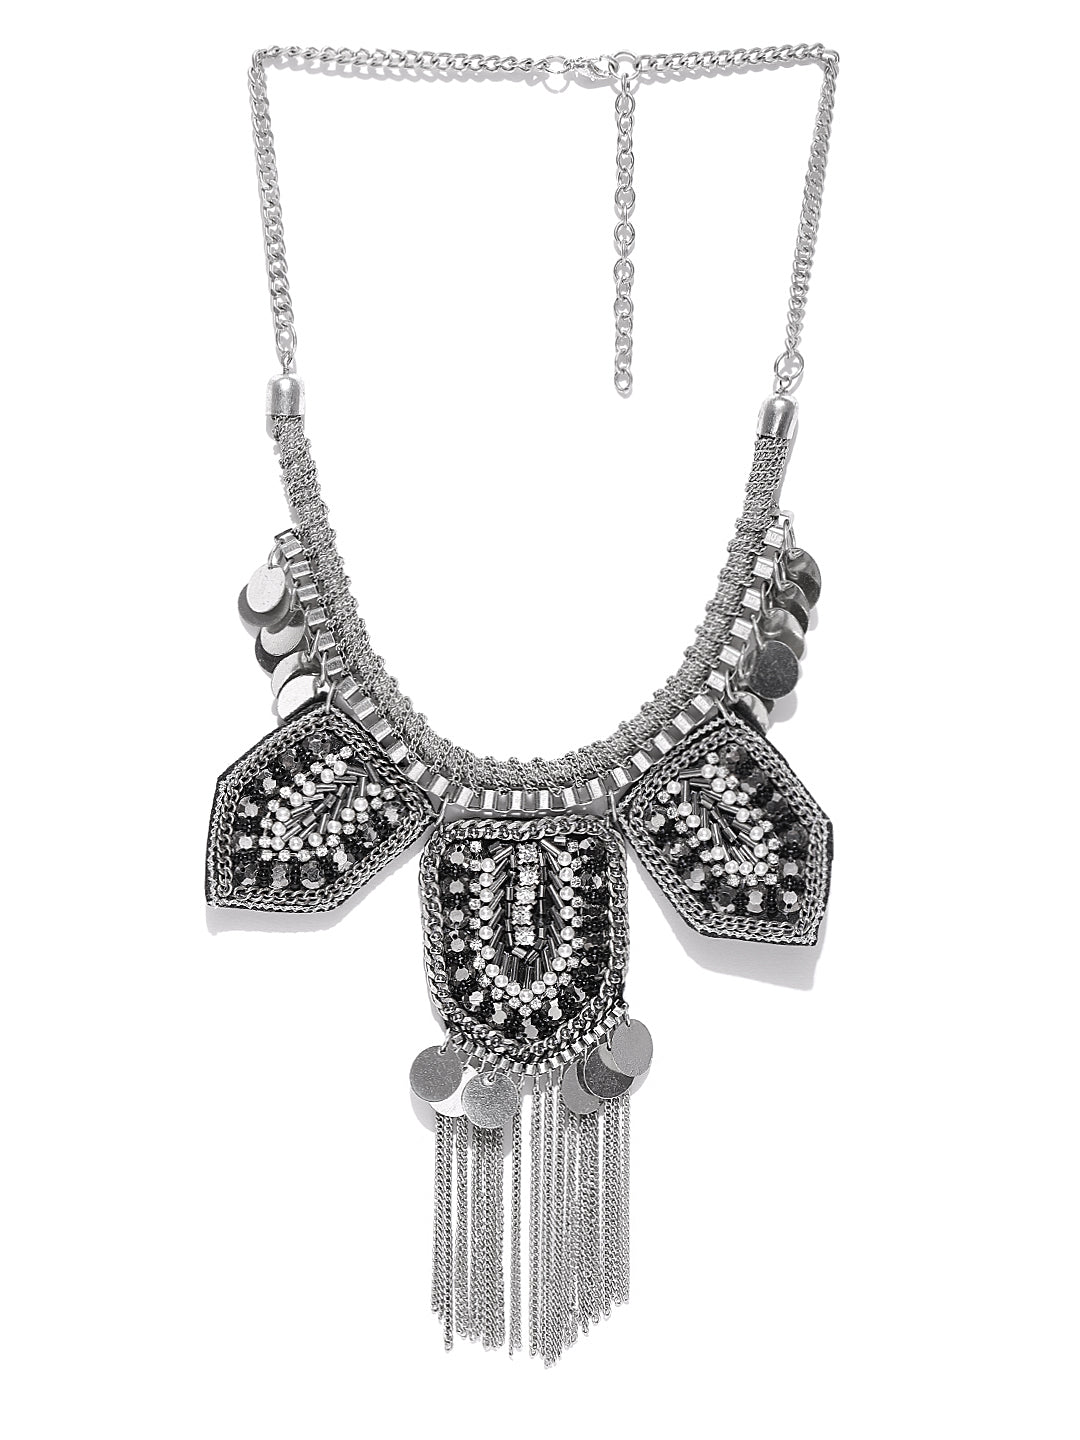 Silver toned statement necklace